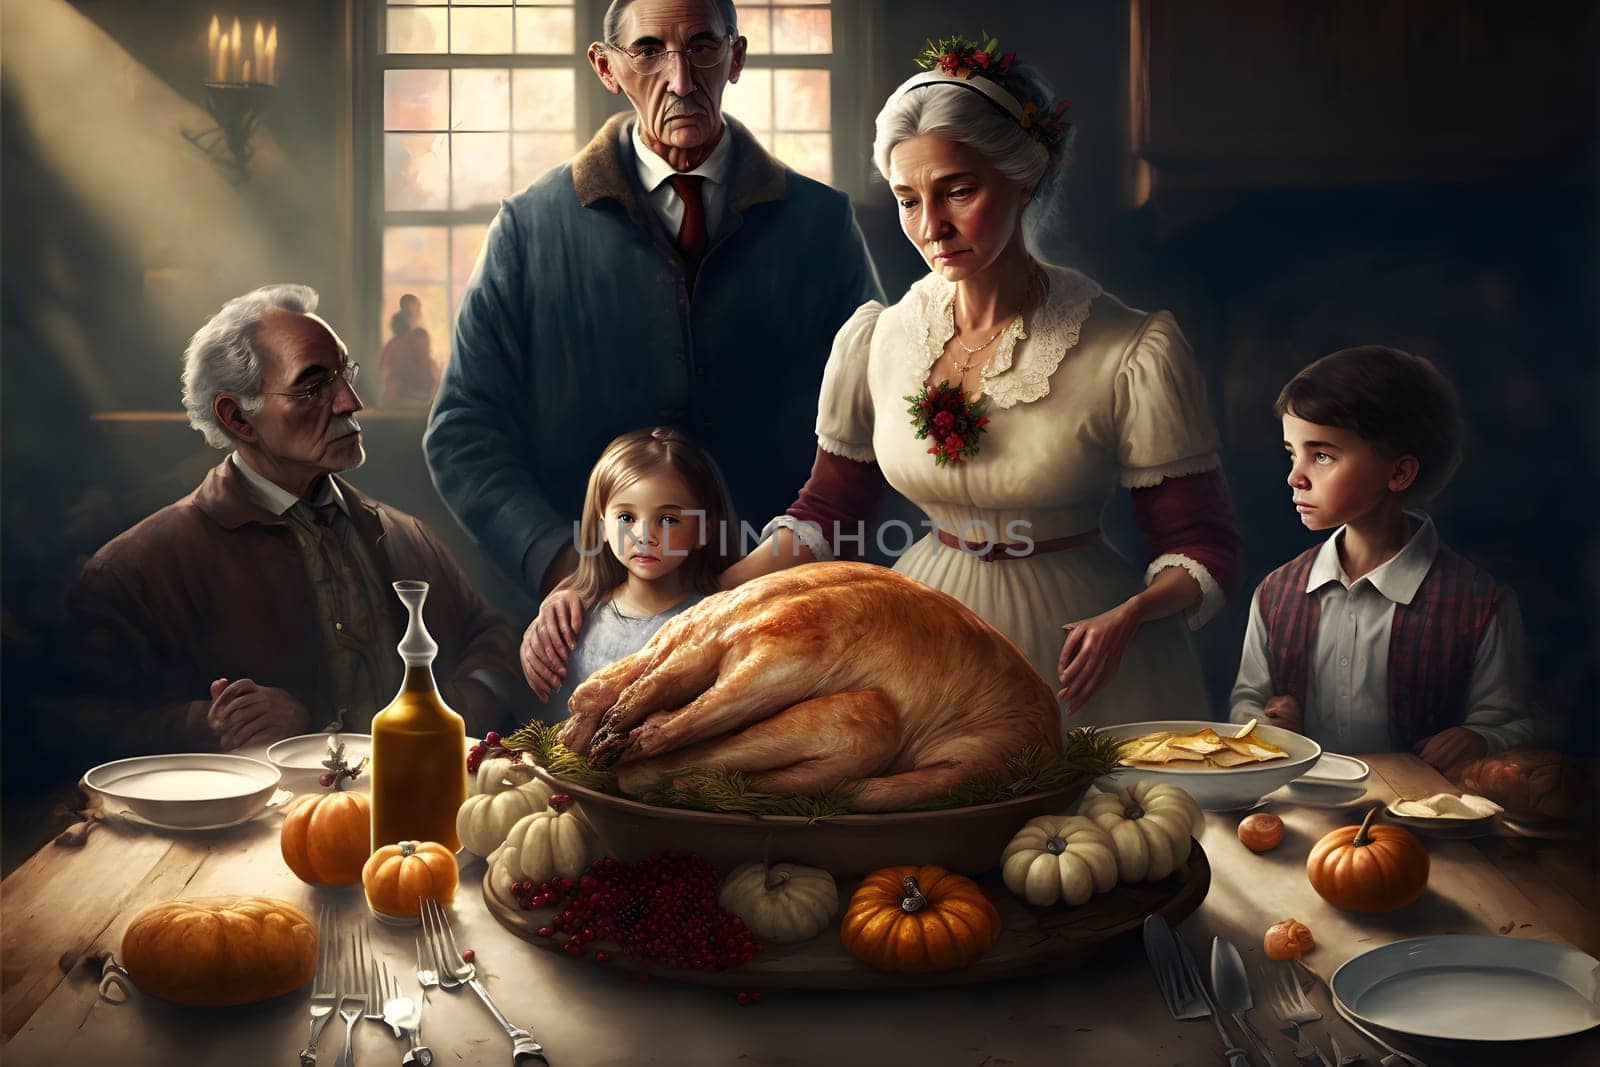 creepy family at thanksgiving table with served roasted turkey, neural network generated art. Digitally generated image. Not based on any actual person, scene or pattern.